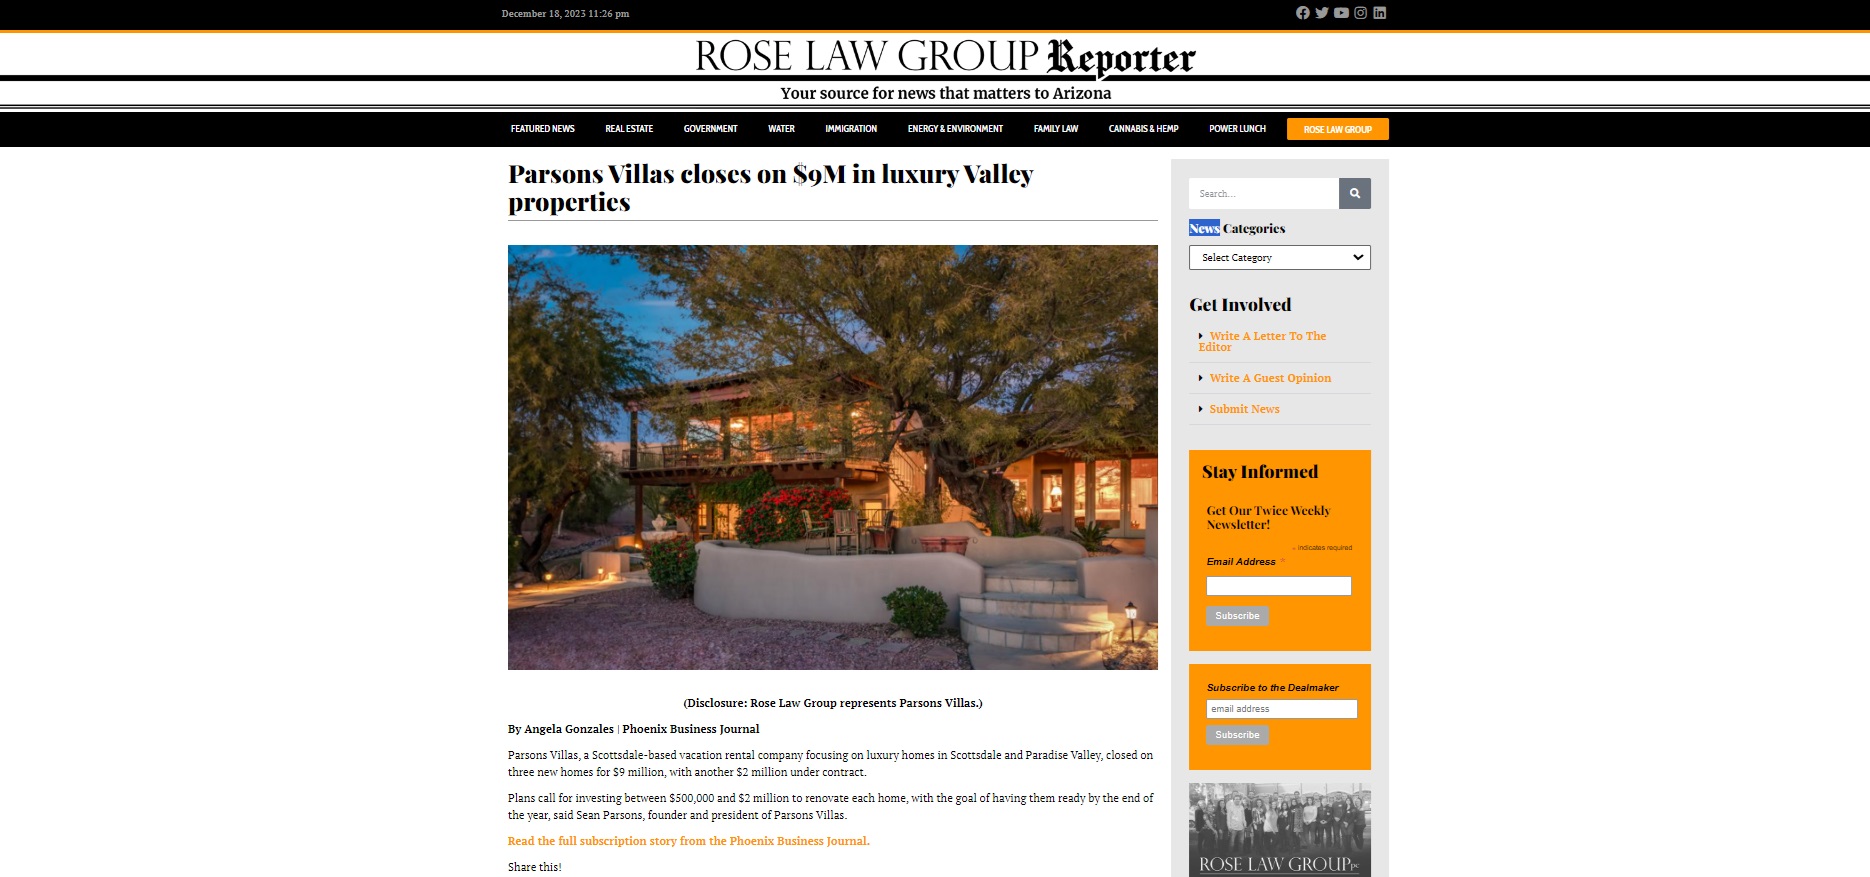 Rose Law Group – Parsons Villas closes on $9M in luxury Valley properties